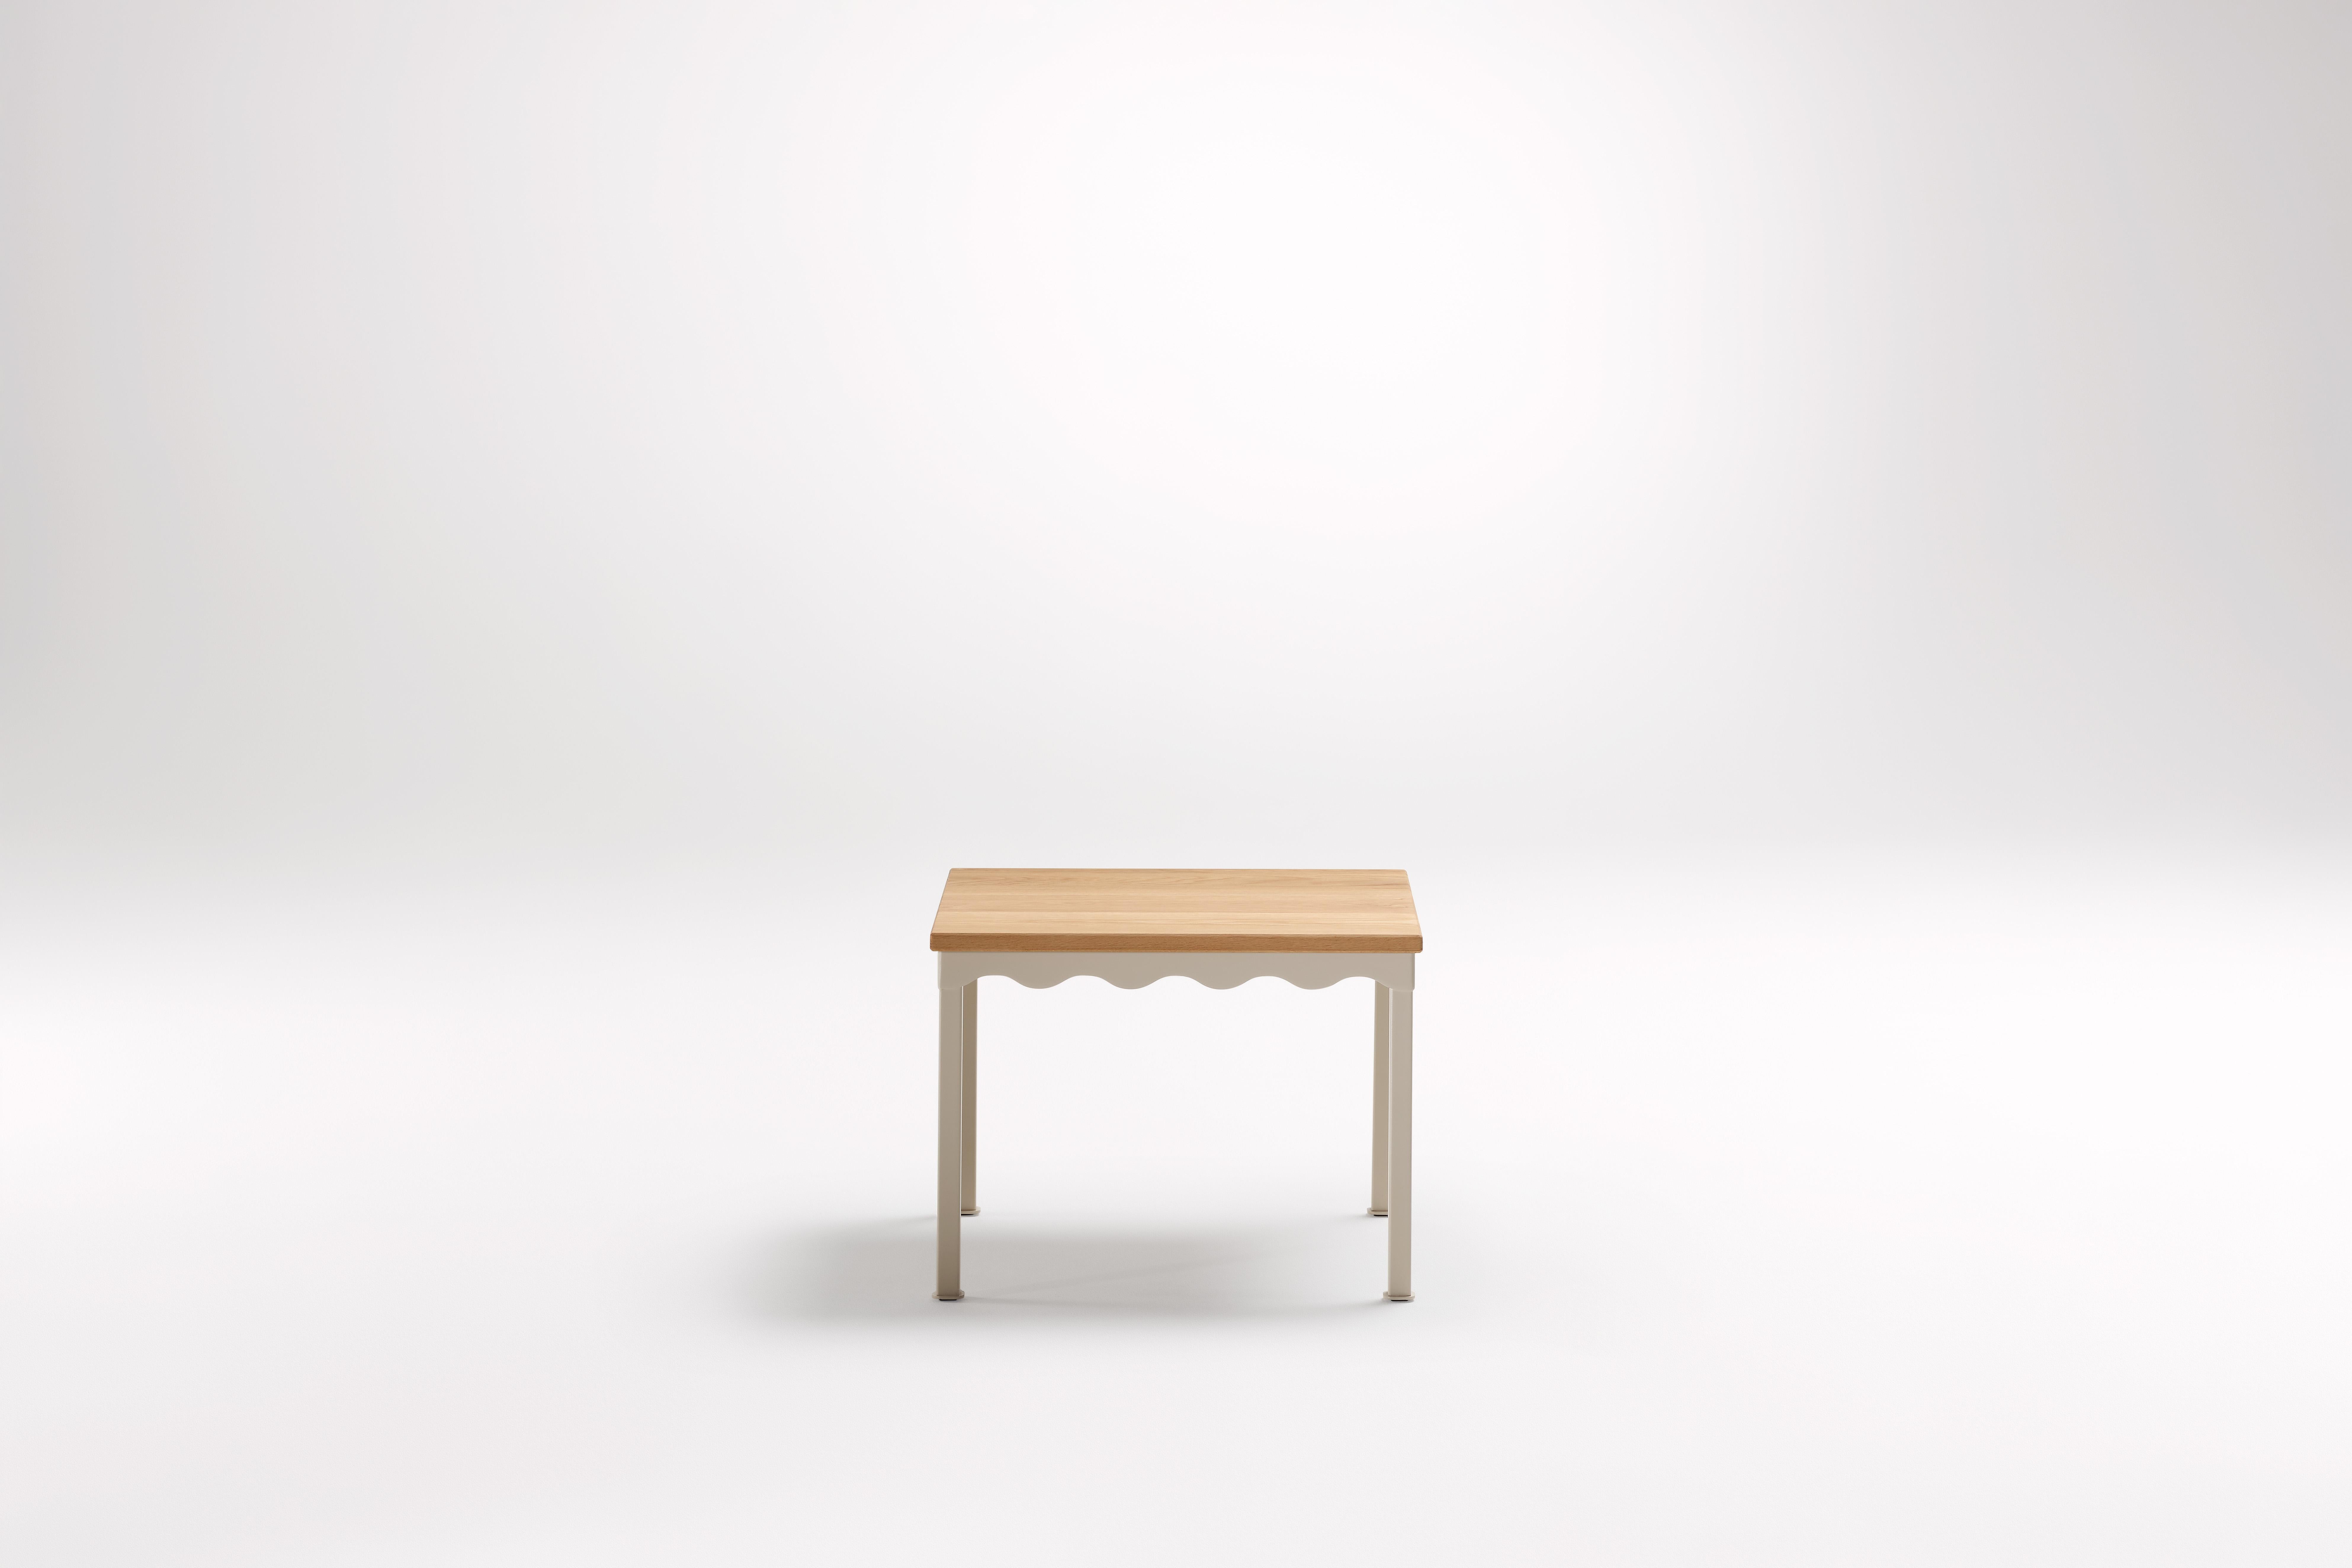 American Oak Bellini Side Table by Coco Flip
Dimensions: D 54 x W 54 x H 39 cm
Materials: Timber / Stone tops, Powder-coated steel frame. 
Weight: 12 kg
Timber Tops :American Oak
Frame Finishes: Textura Paperbark.

Coco Flip is a Melbourne based